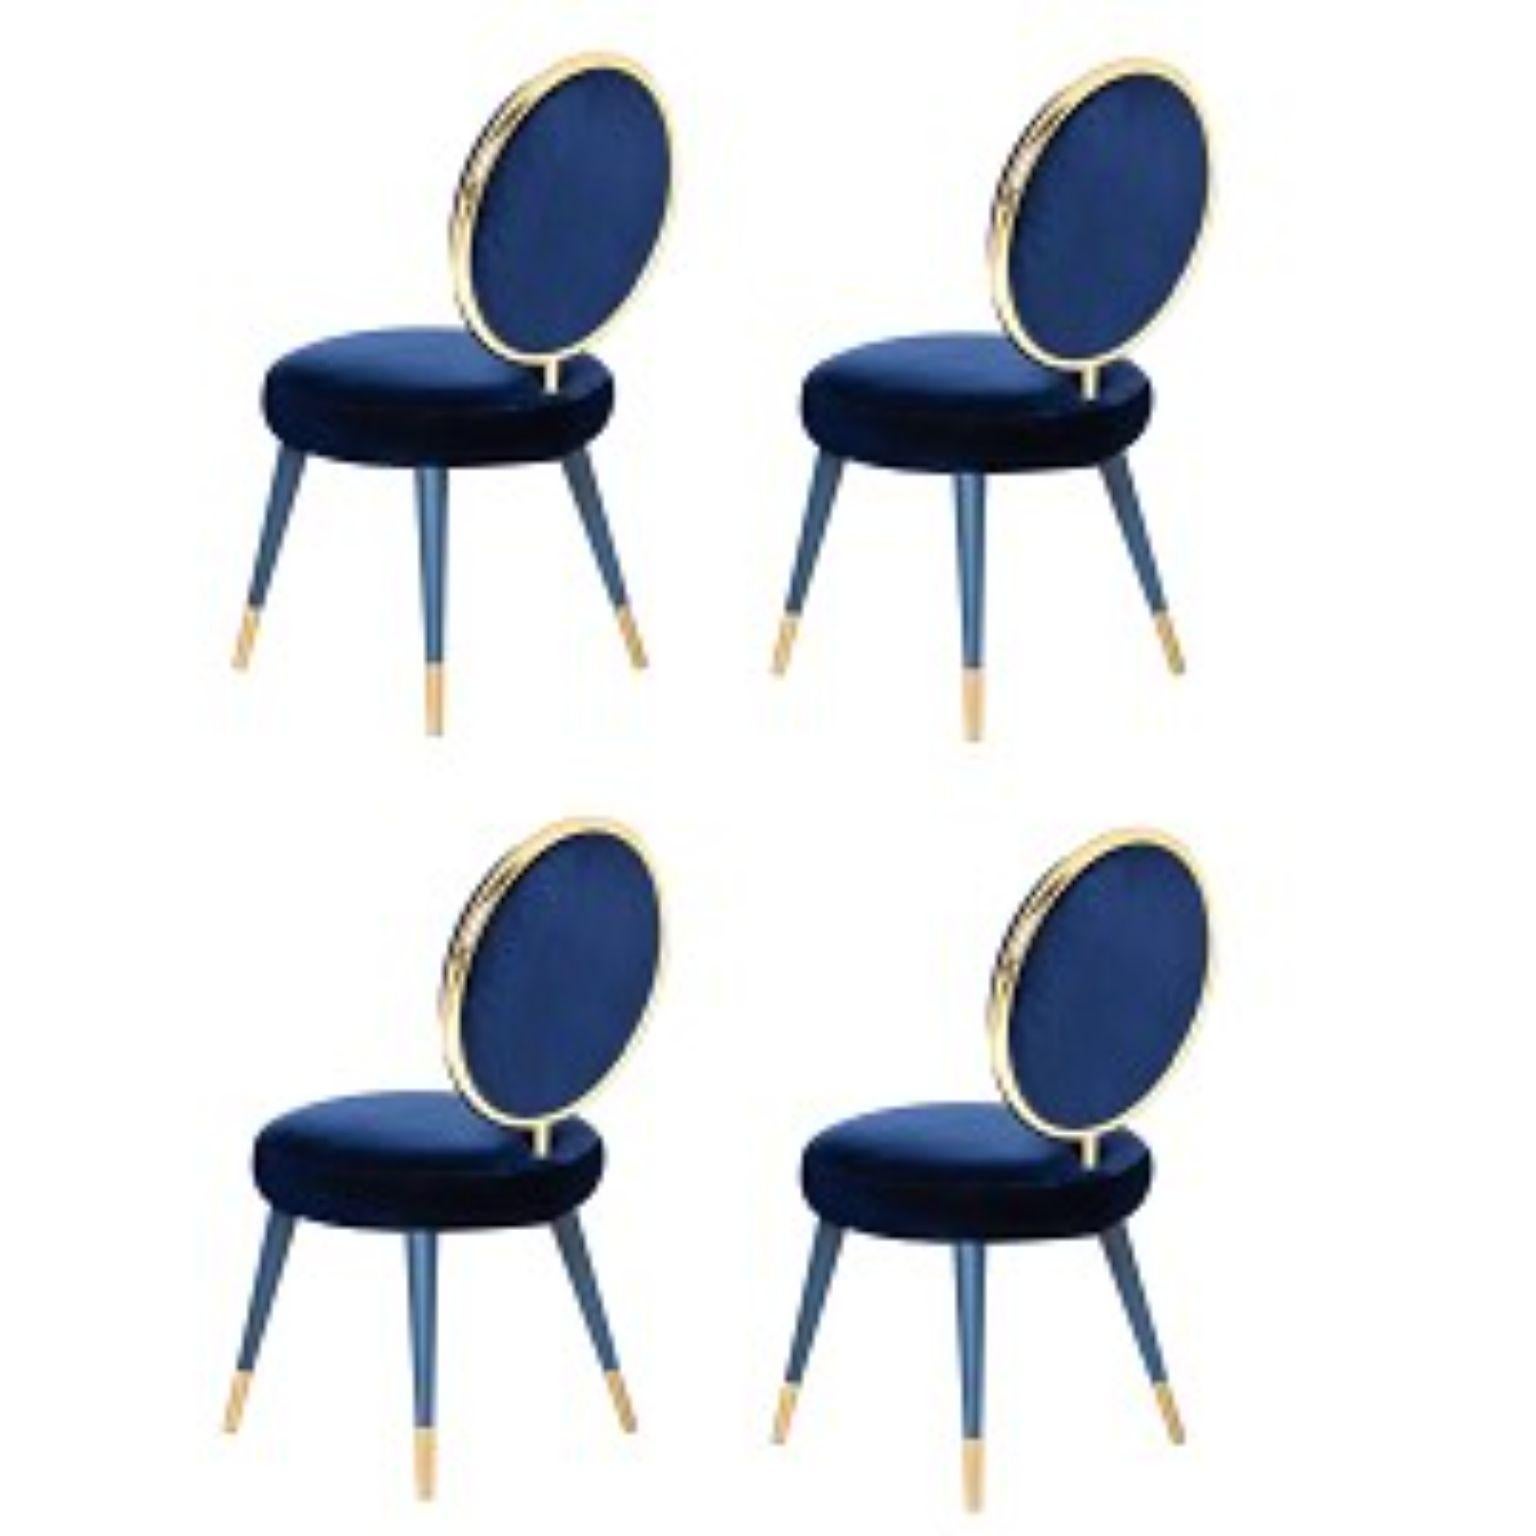 Set of 4 graceful dining chairs, Royal Stranger
Dimensions: 95 x 54 x 54 cm
Materials: Blossom pink velvet upholstery with stainless steel coated in brass frame elevated by lacquered wood legs and brass feet covers.

Available in: mint green,